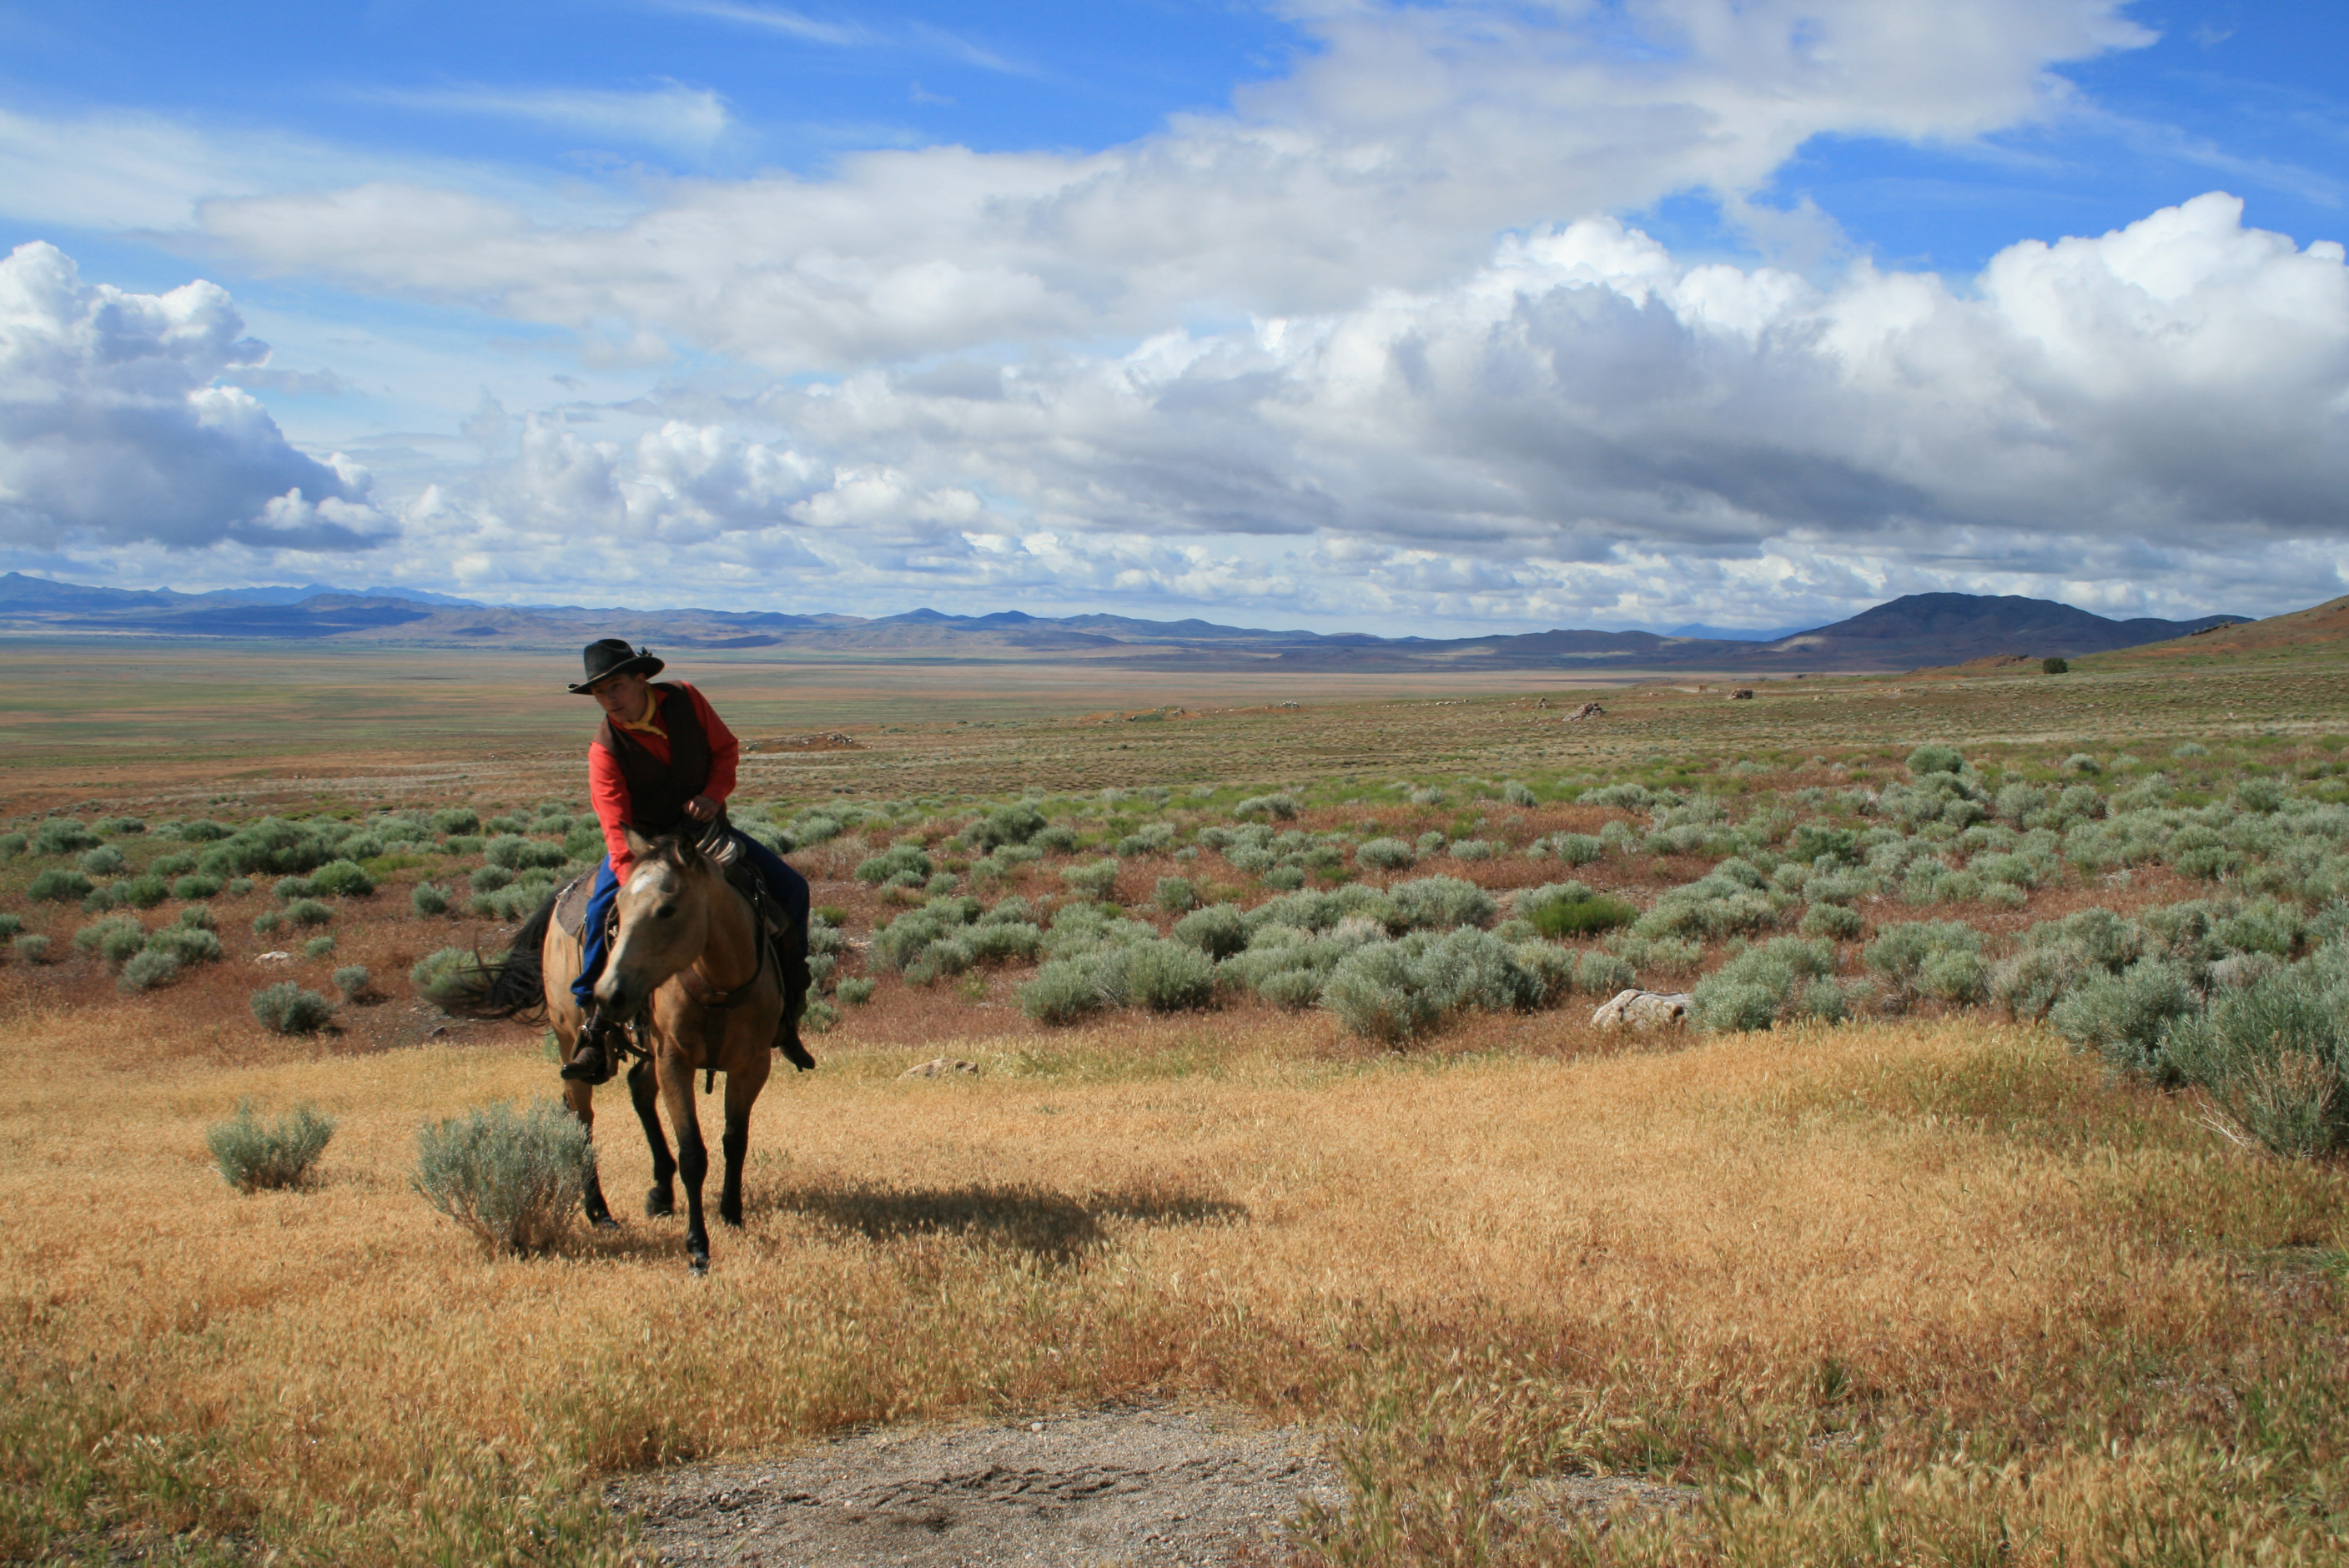 A rider in a red vest on a horse in a grassy patch surrounded by sagebrush with clouds in the sky.